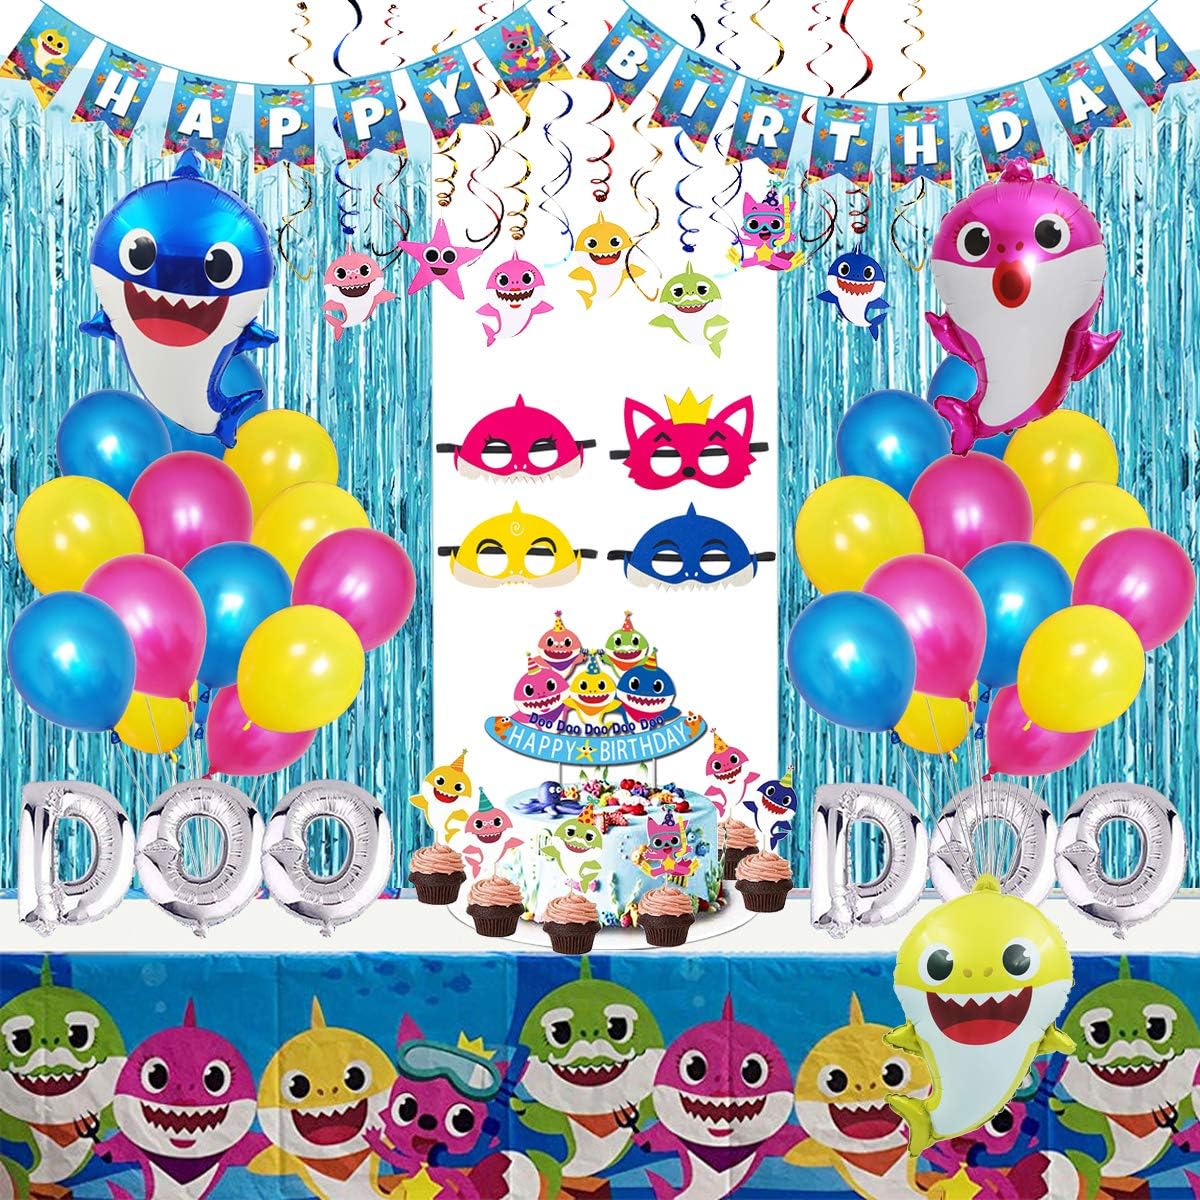 Shark Party Supplies for Baby, 77 pcs Shark Theme Birthday Party Decorations for Kids - Includes Shark Masks, Hanging Swirl, Little Shark Balloons, Foil Curtains, Table Cloth, Banner, Toppers